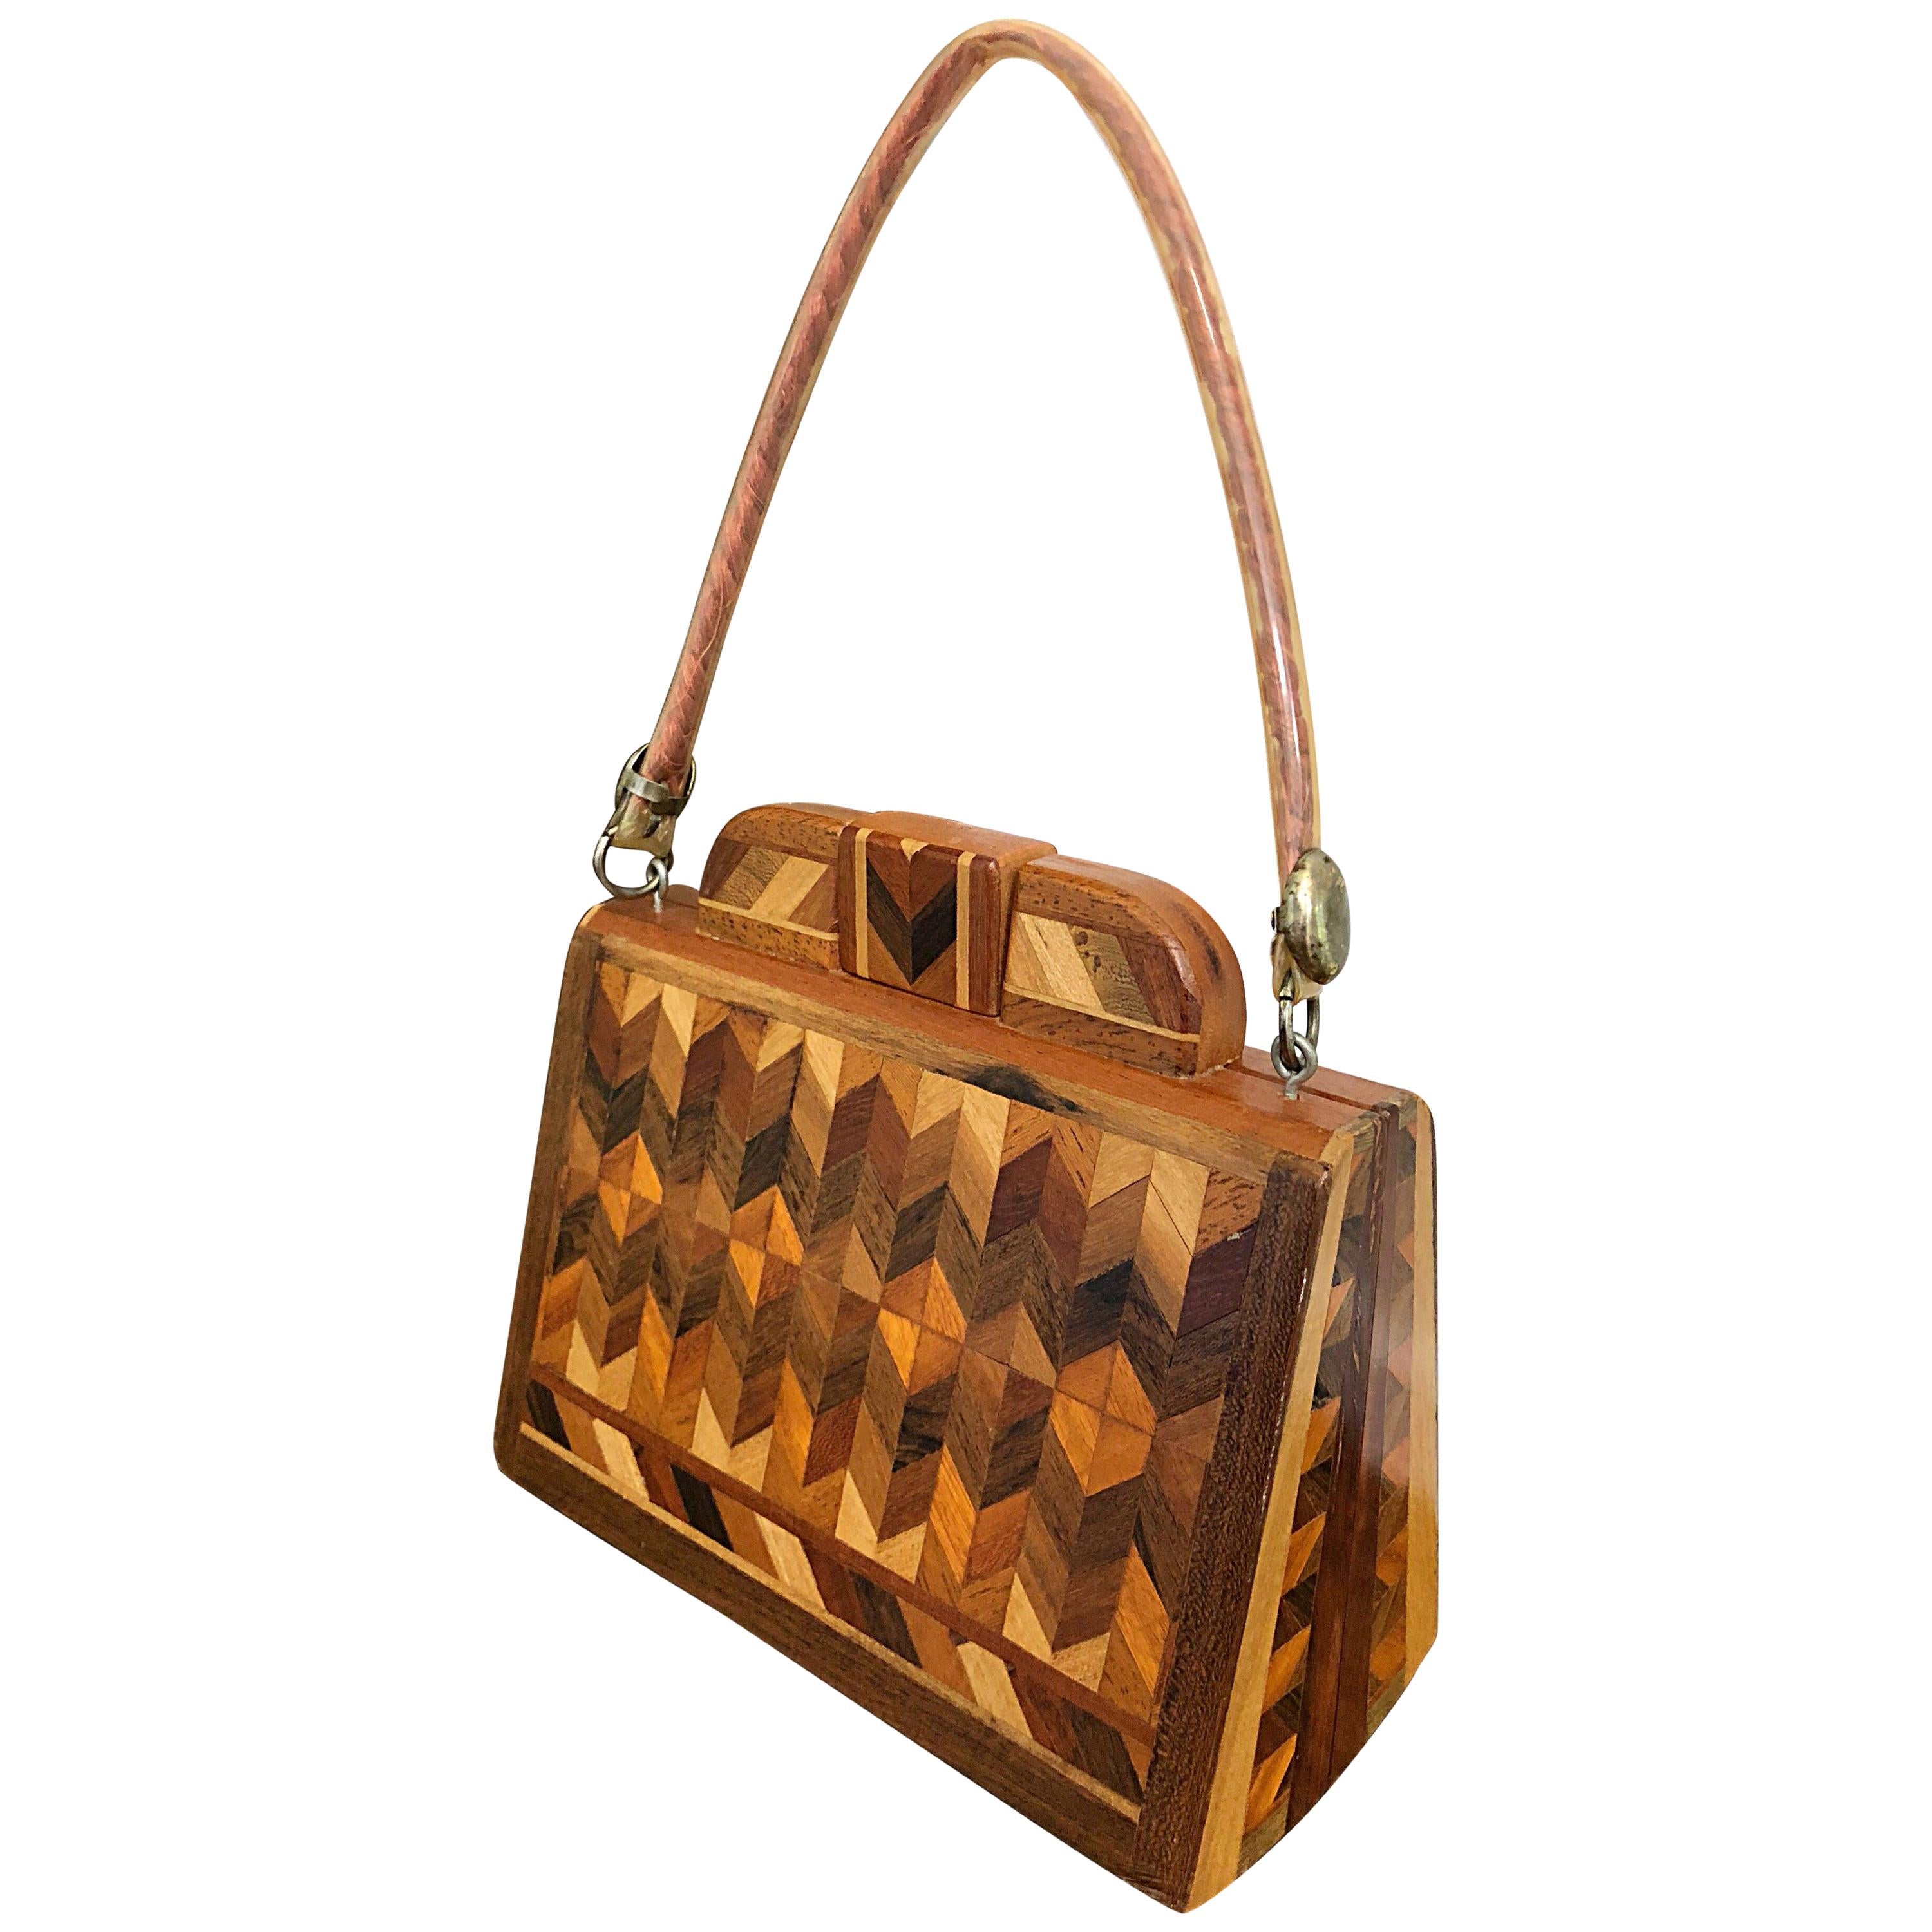 Chic 1960s Wood Patchwork Novelty Egyptian Triangular Purse Vintage 60s Hand Bag